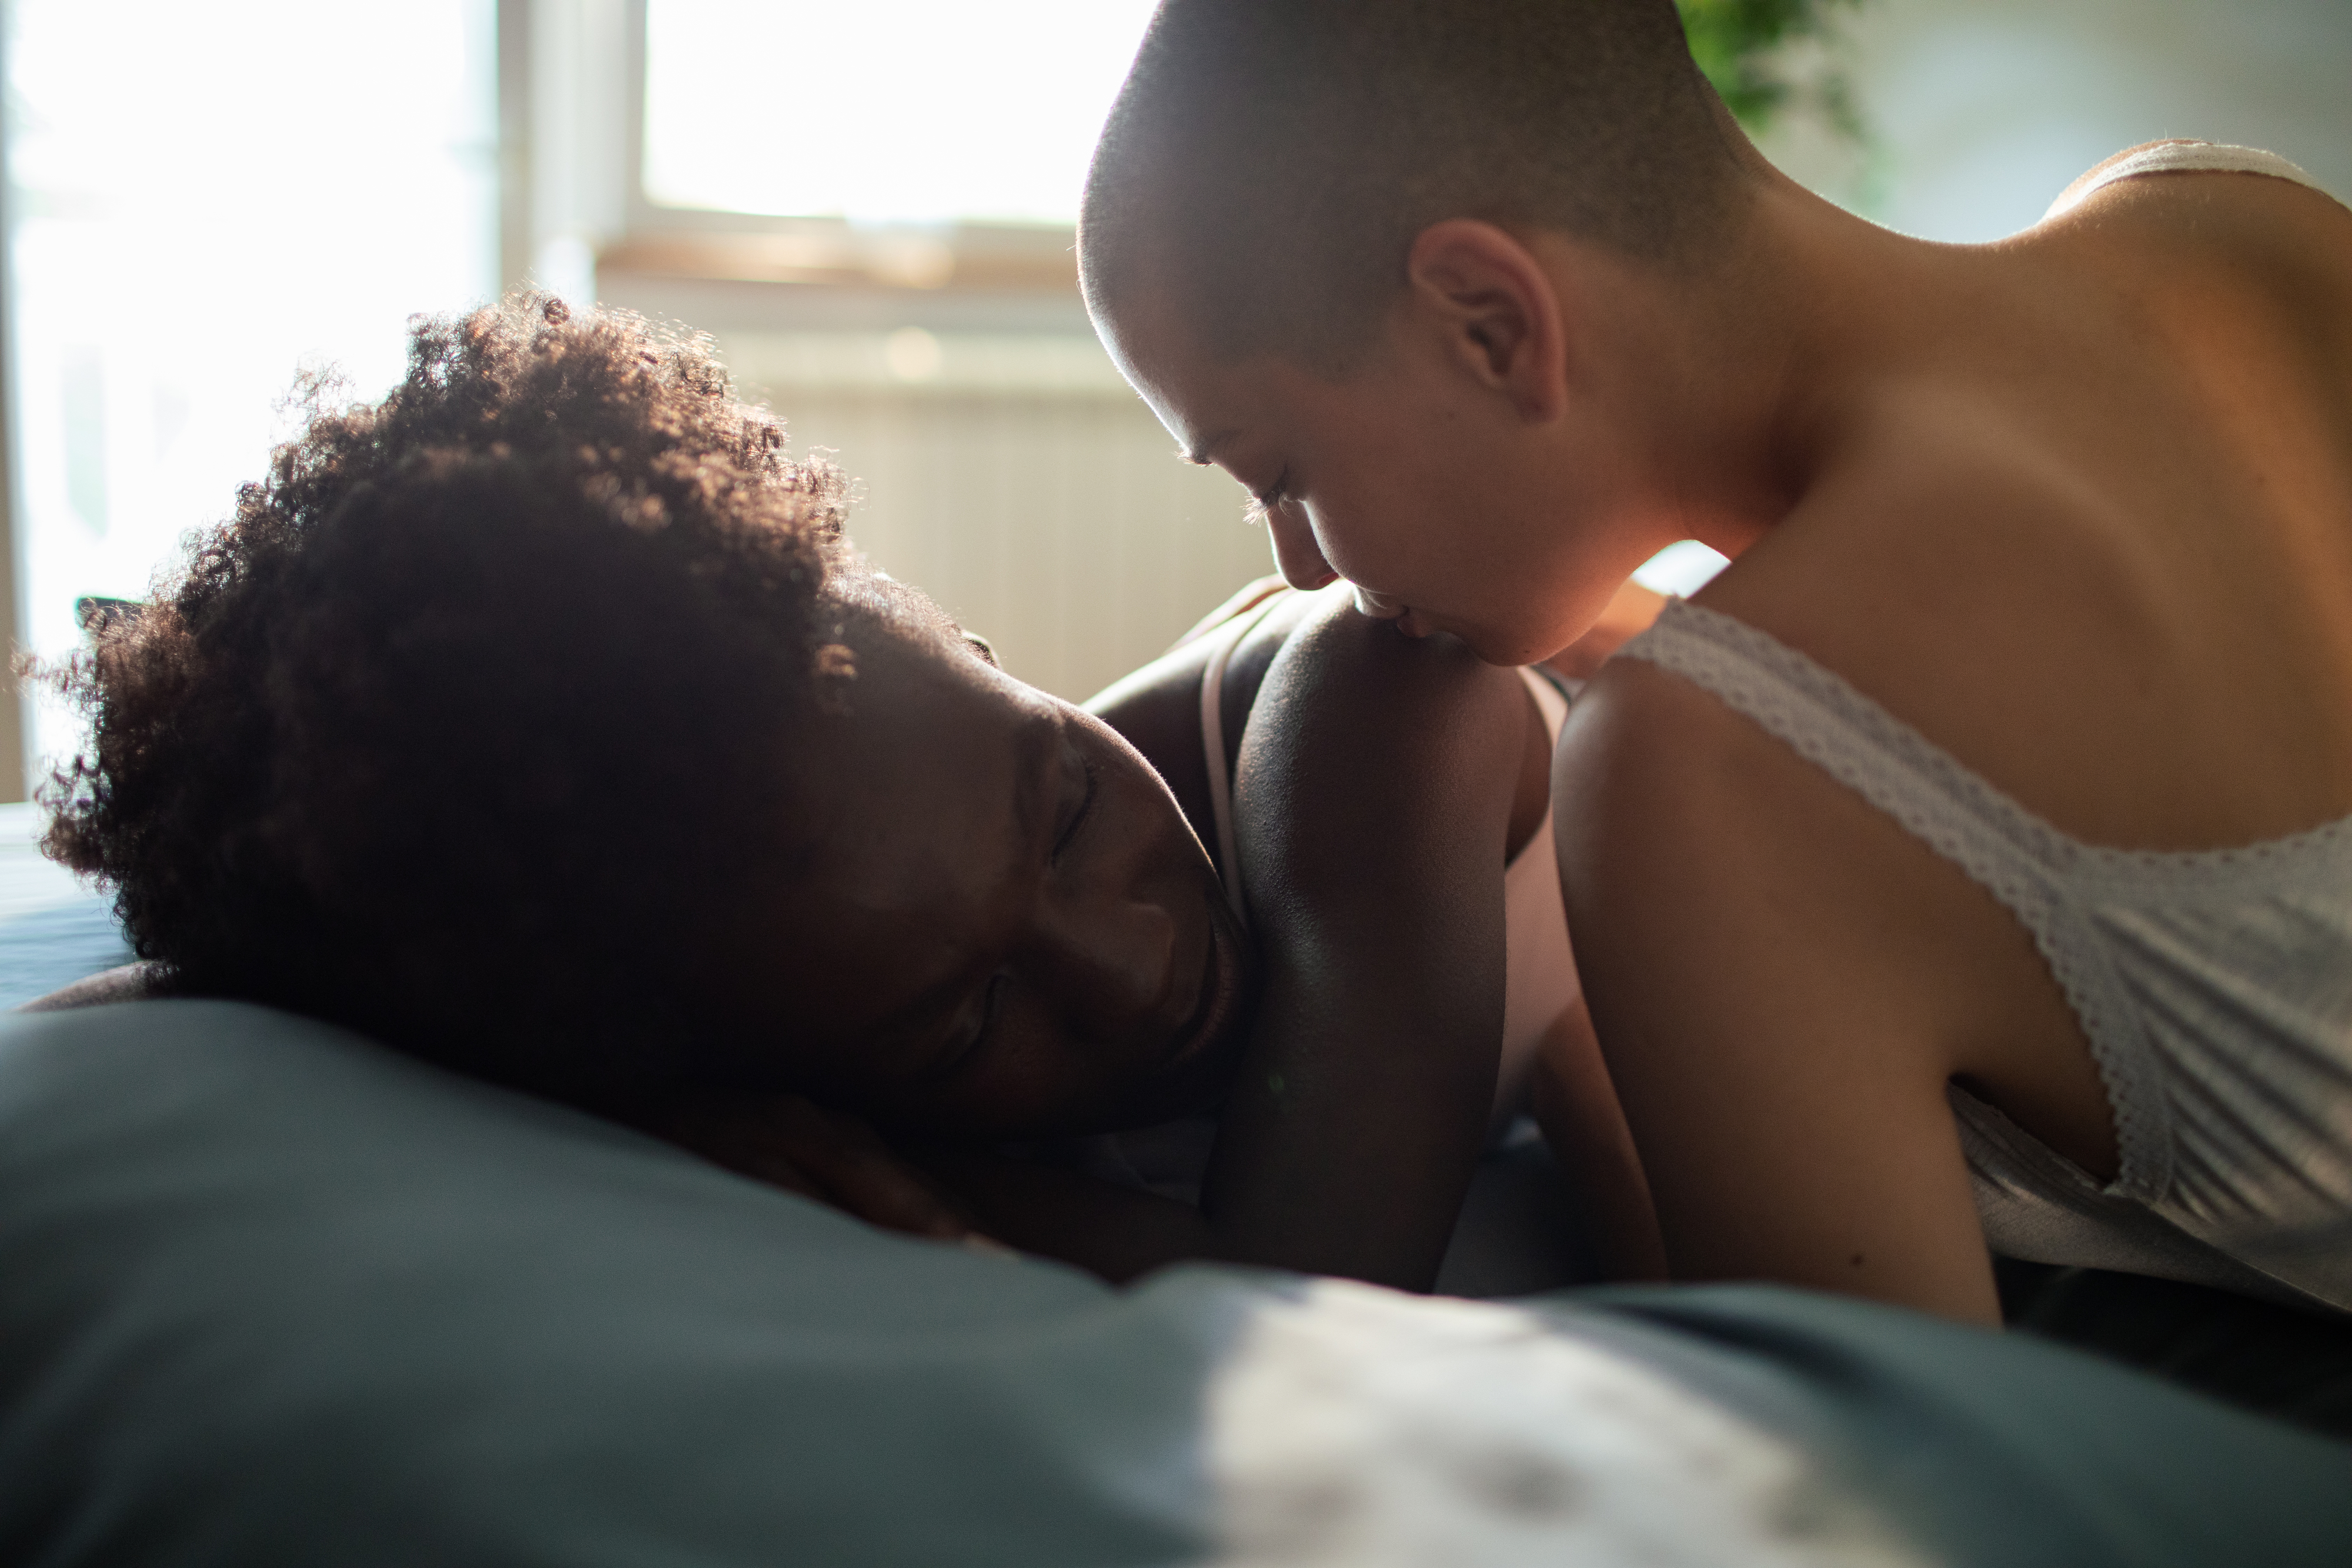 Two people share an intimate moment, one lying in bed and the other leaning over, foreheads touching